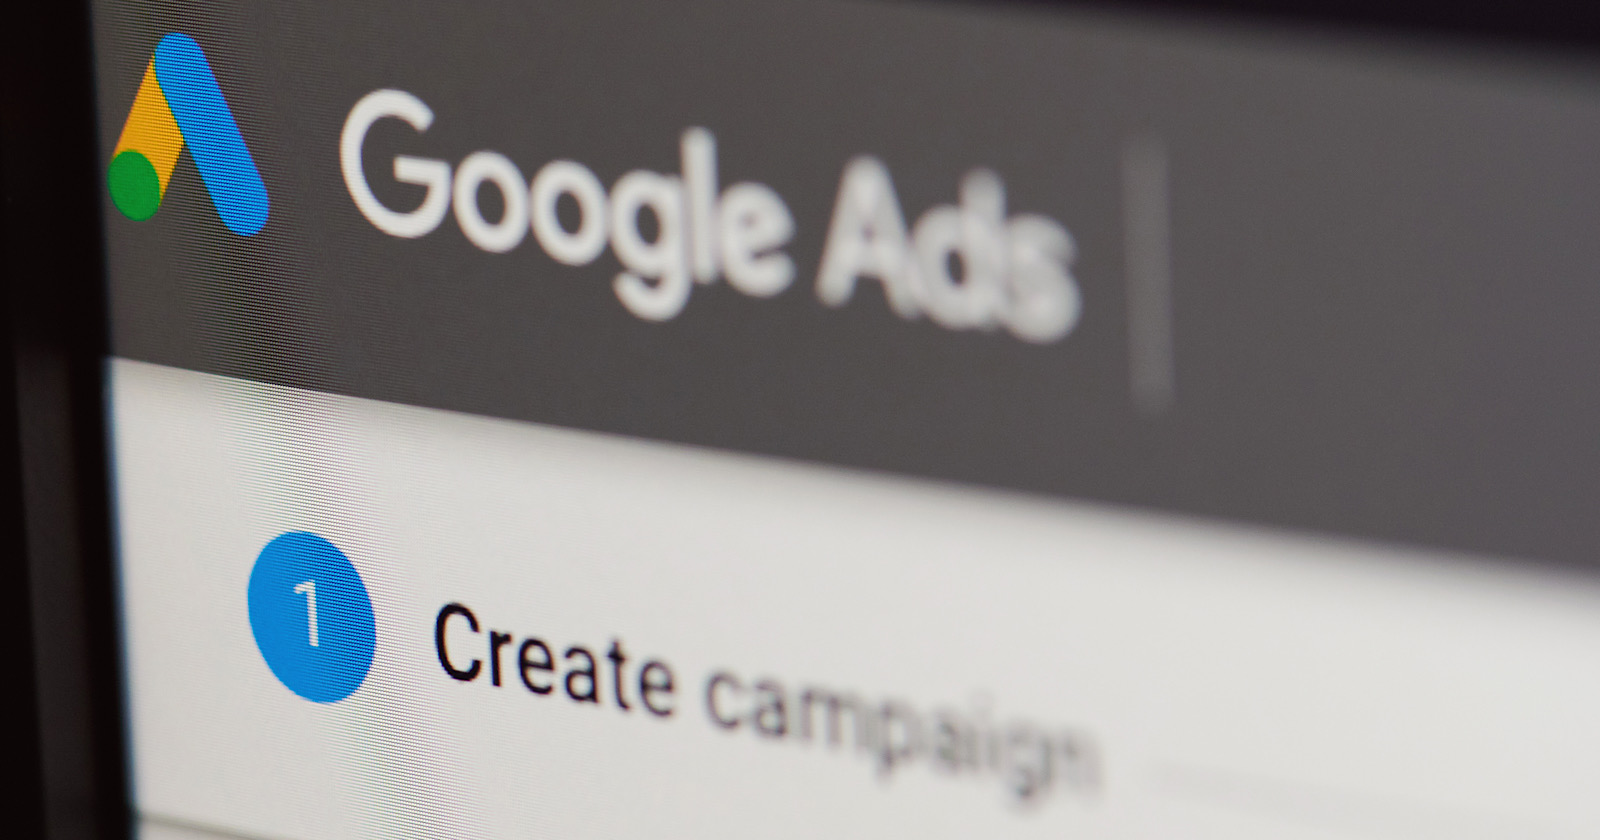 google ads editor gets new features support for new campaign types via mattgsouthern